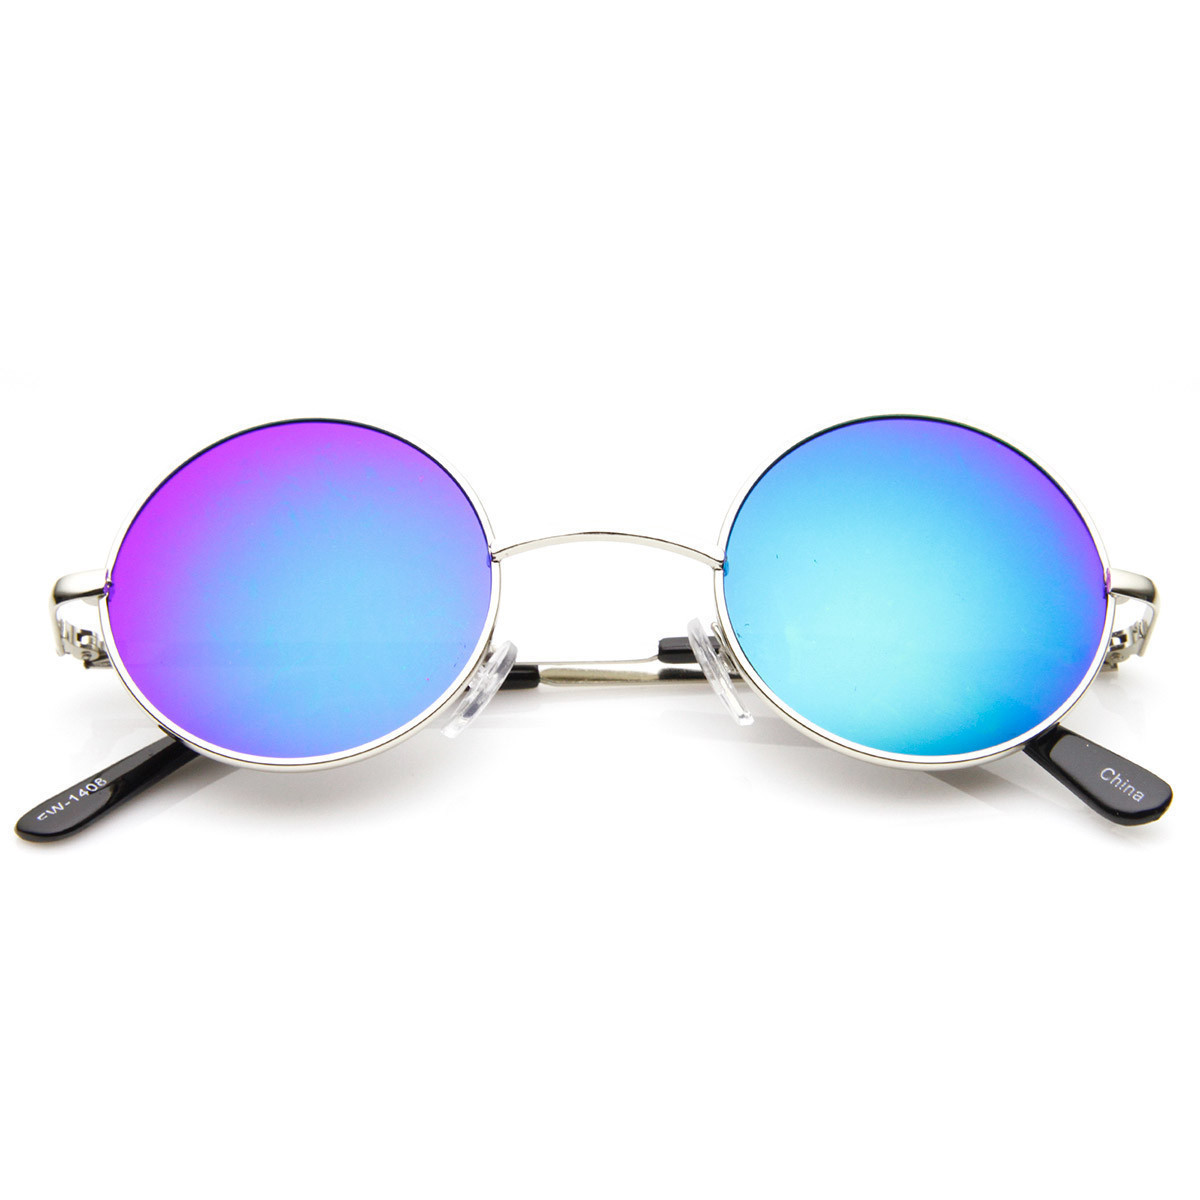 Lennon Style Round Circle Metal Sunglasses With Color Mirror Lens - 1408 - Silver Ice